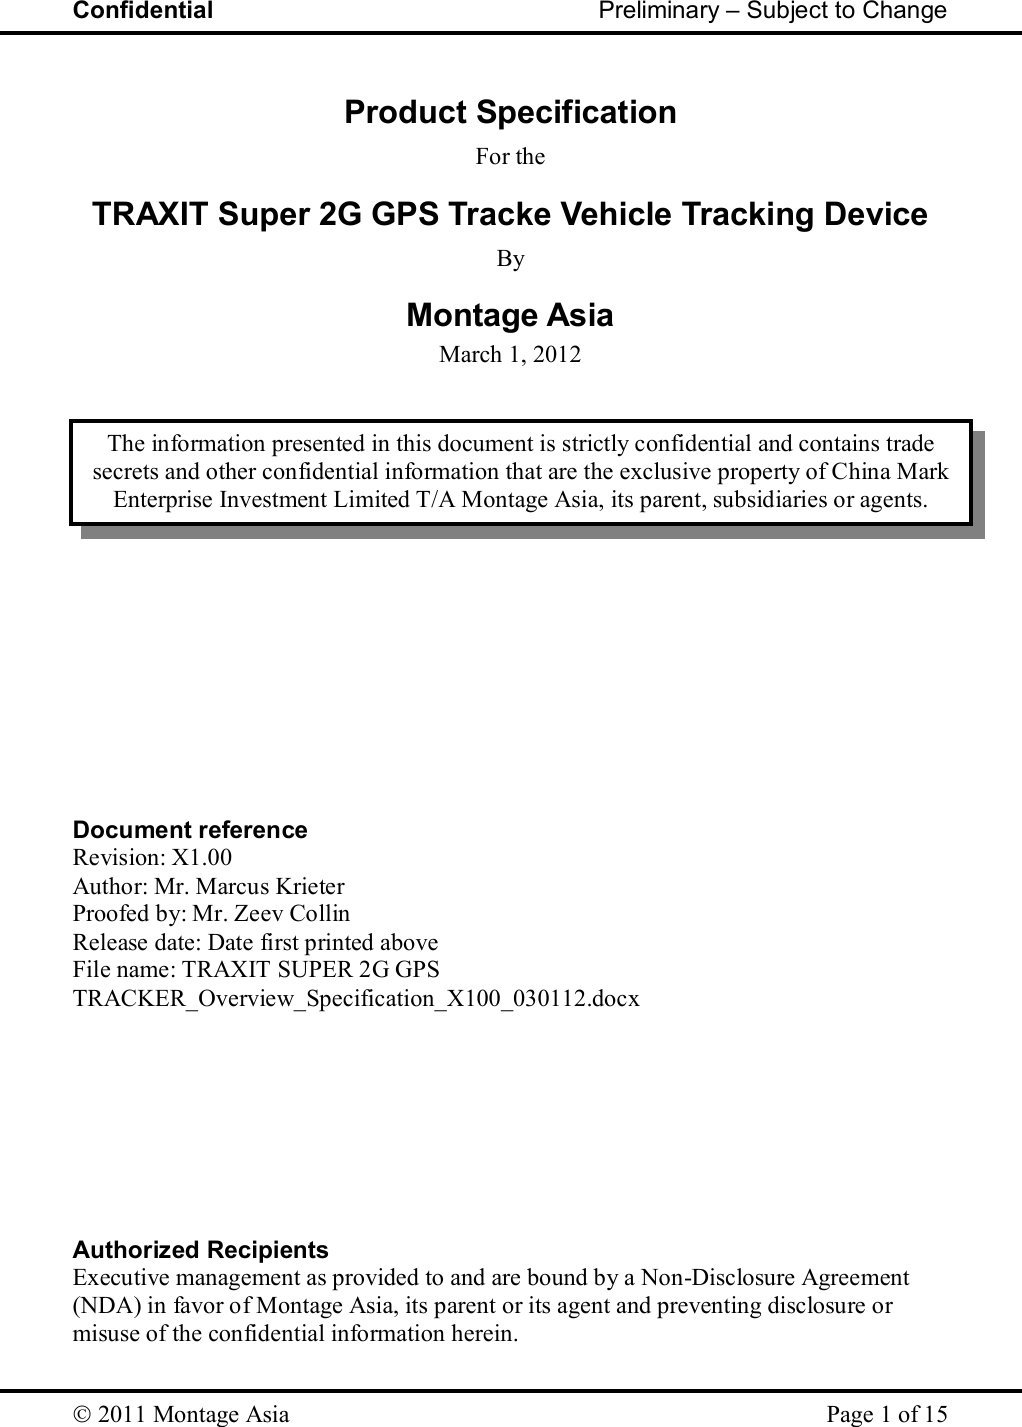 Confidential                                                         Preliminary – Subject to Change   2011 Montage Asia    Page 1 of 15  Product Specification For the TRAXIT Super 2G GPS Tracke Vehicle Tracking Device By Montage Asia March 1, 2012                 Document reference Revision: X1.00 Author: Mr. Marcus Krieter Proofed by: Mr. Zeev Collin Release date: Date first printed above File name: TRAXIT SUPER 2G GPS TRACKER_Overview_Specification_X100_030112.docx         Authorized Recipients Executive management as provided to and are bound by a Non-Disclosure Agreement (NDA) in favor of Montage Asia, its parent or its agent and preventing disclosure or misuse of the confidential information herein. The information presented in this document is strictly confidential and contains trade secrets and other confidential information that are the exclusive property of China Mark Enterprise Investment Limited T/A Montage Asia, its parent, subsidiaries or agents. 